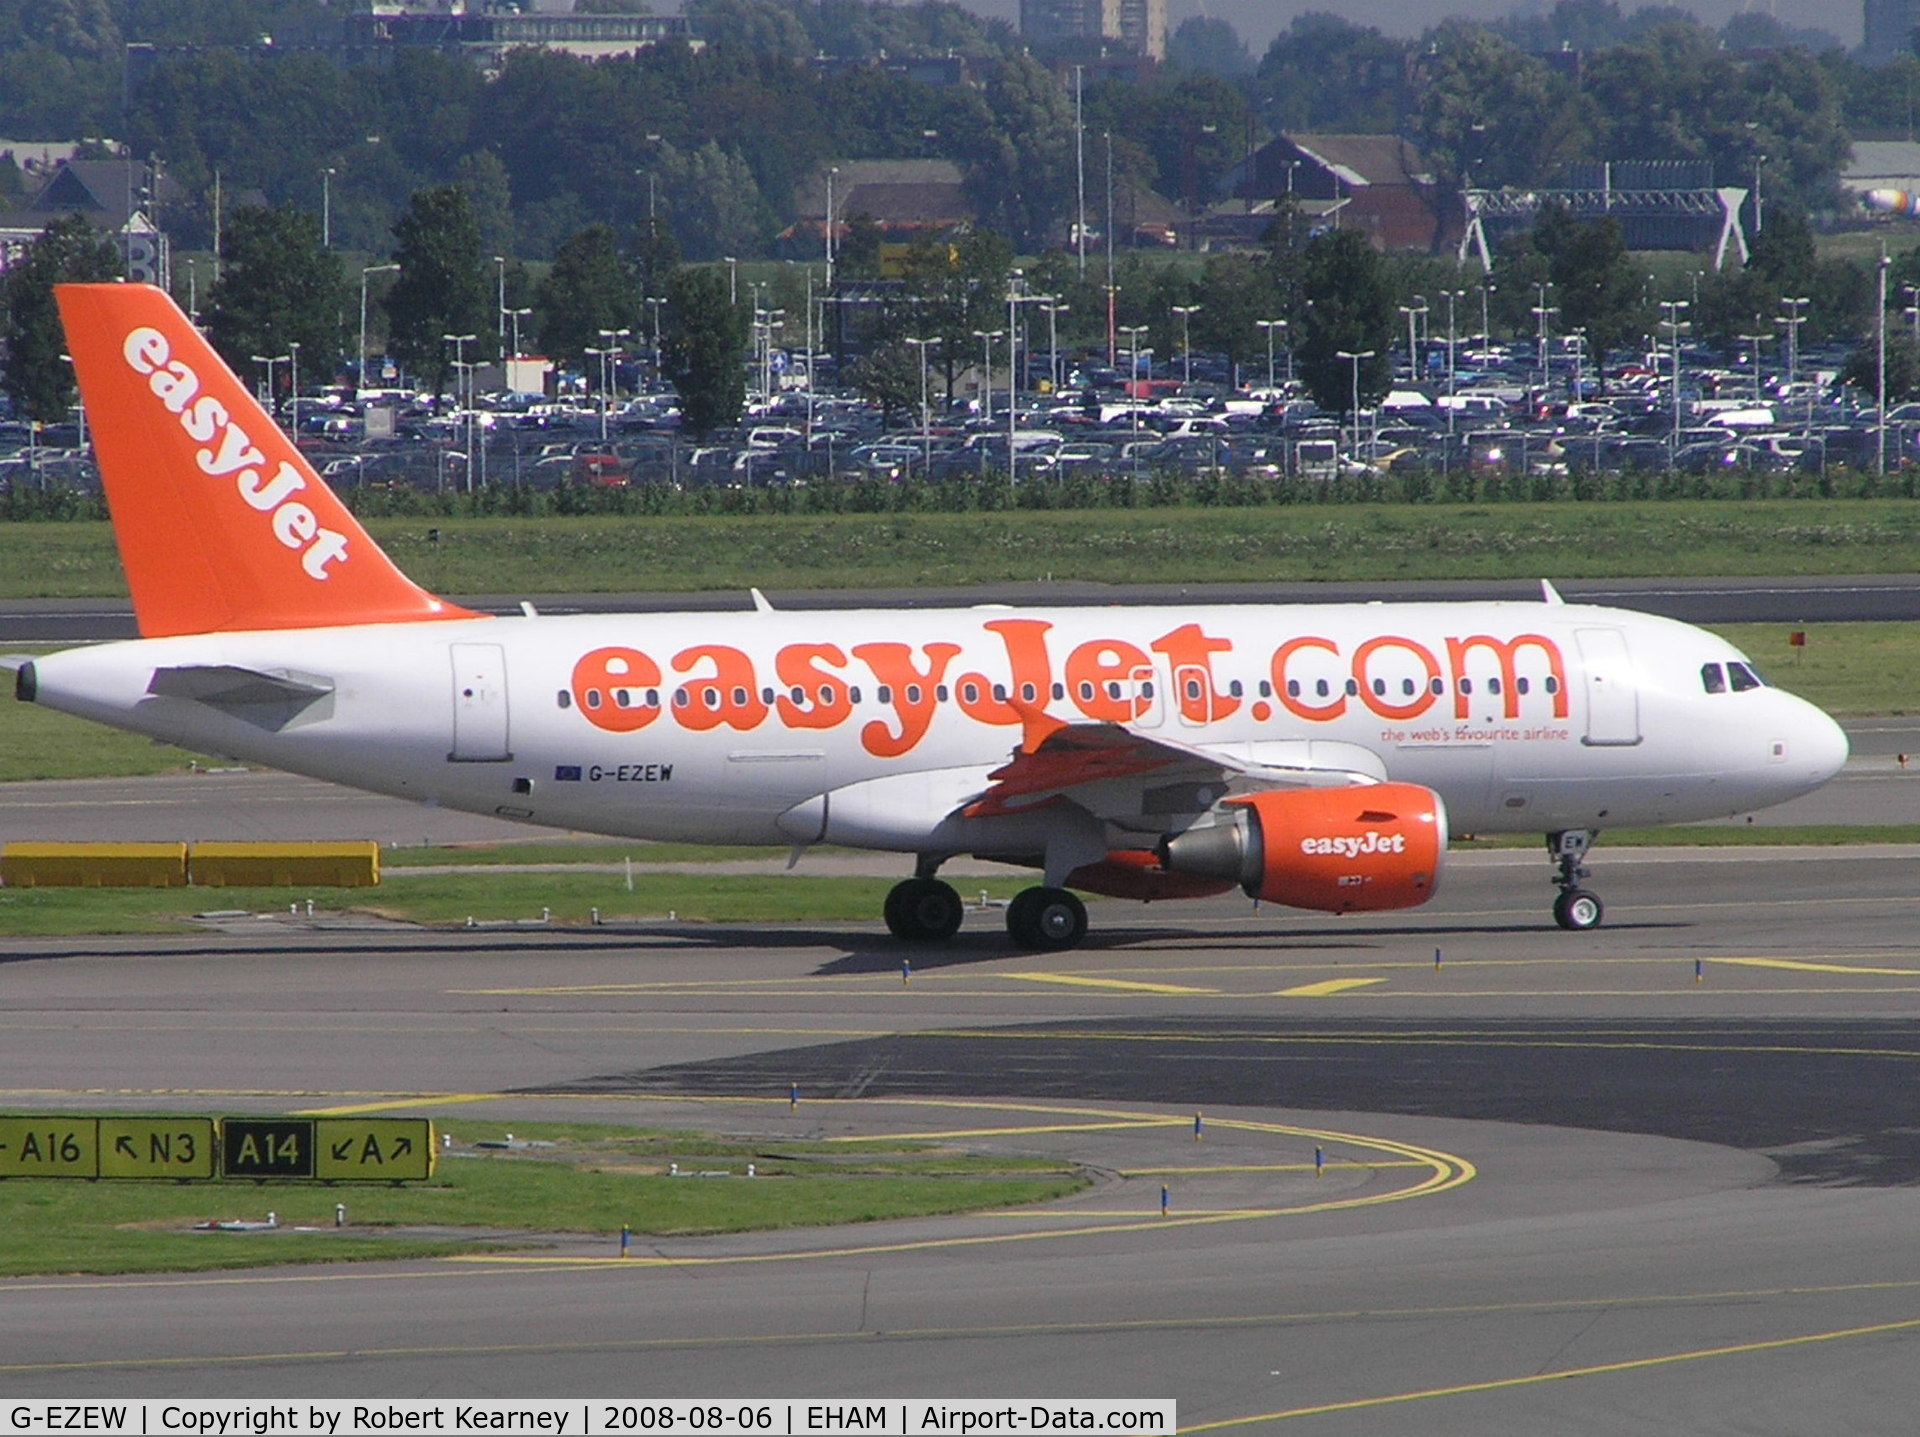 G-EZEW, 2004 Airbus A319-111 C/N 2300, Easy Jet taxiing for take-off